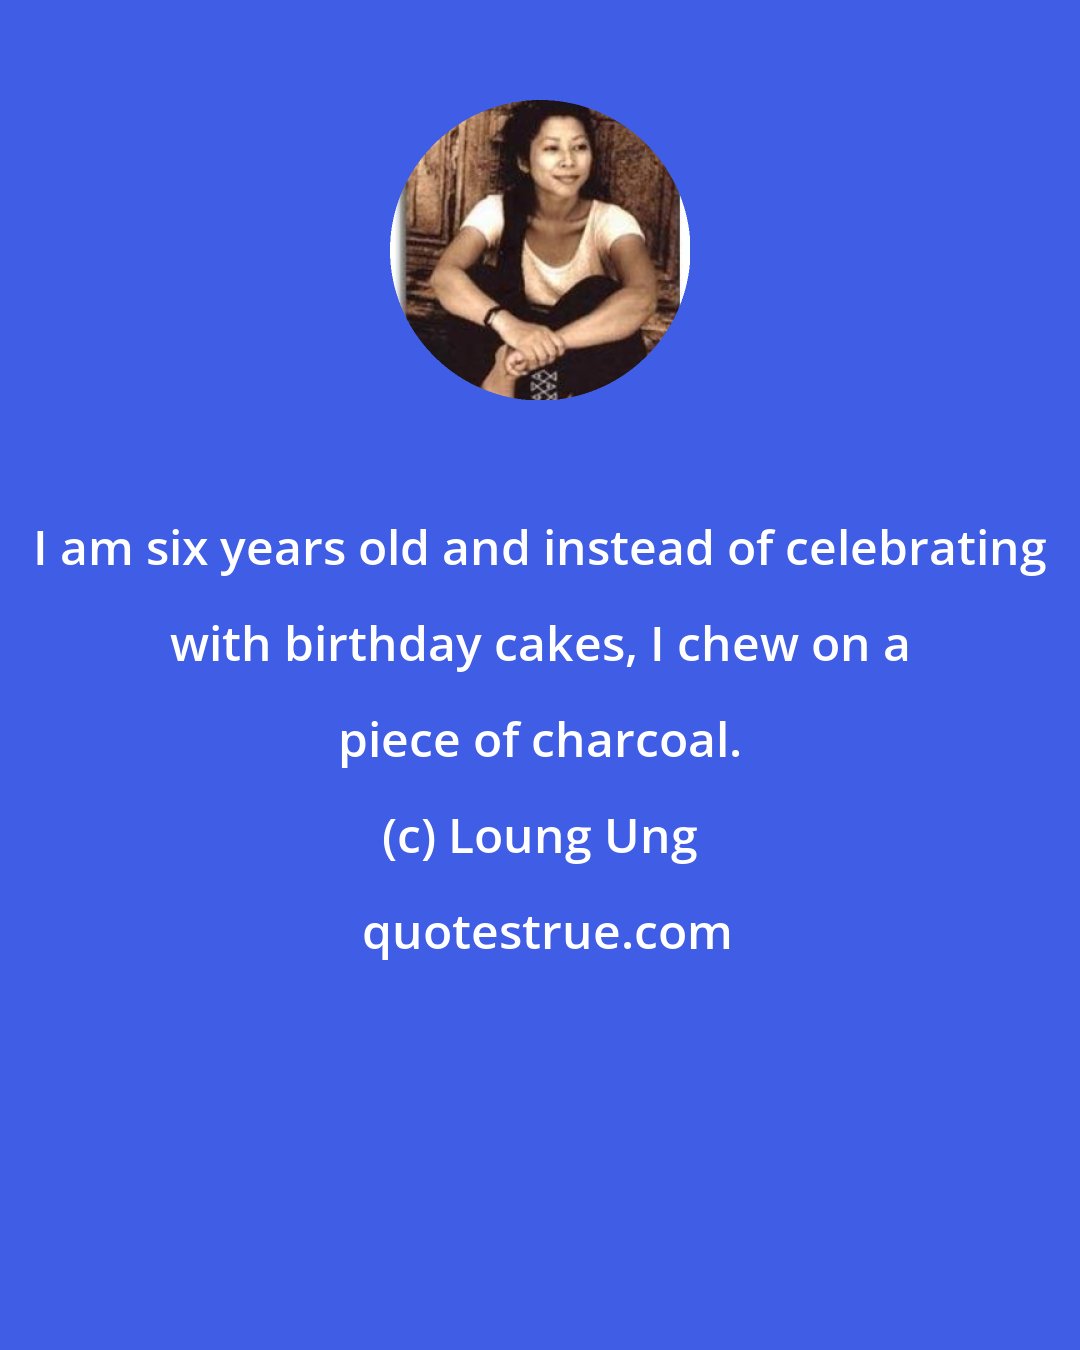 Loung Ung: I am six years old and instead of celebrating with birthday cakes, I chew on a piece of charcoal.